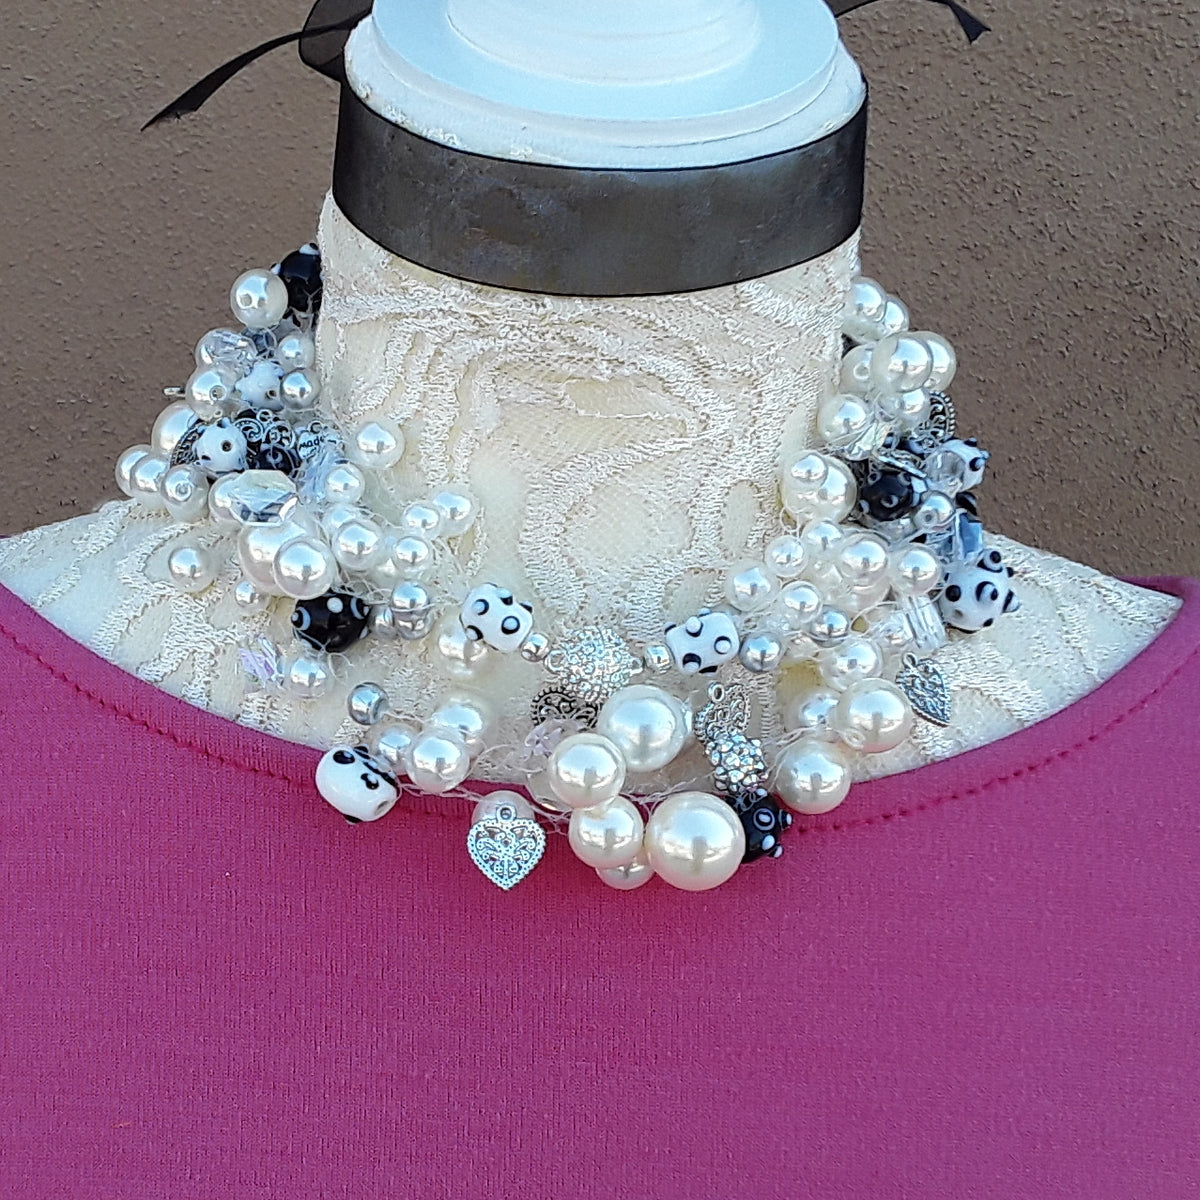 Black and White Pearl Statement Choker or Necklace, Multi-strand Crocheted Long Sautoir